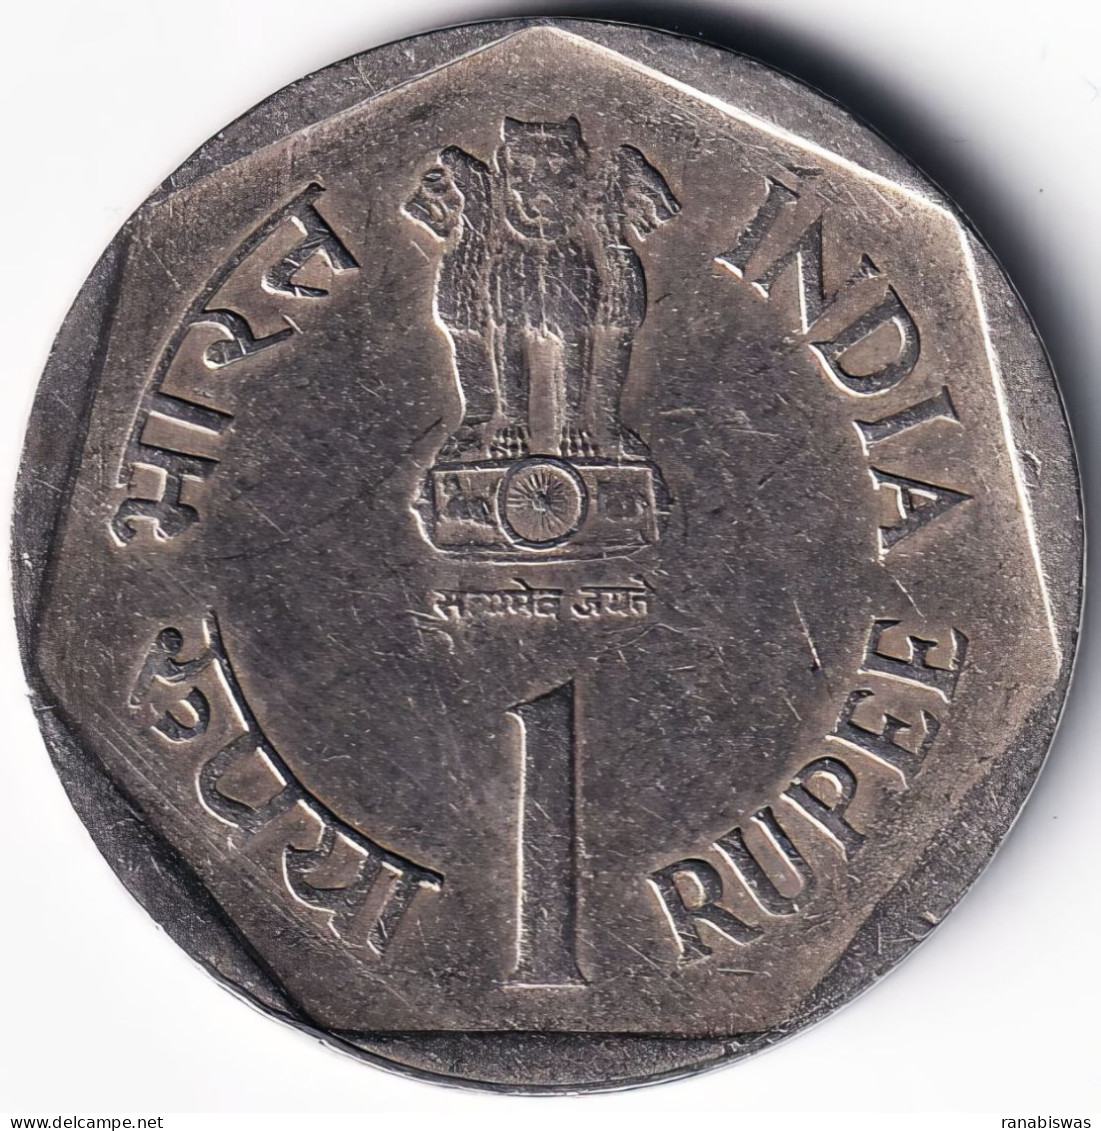 INDIA COIN LOT 112, 1 RUPEE 1987, SMALL FARMERS, HYDERABAD MINT, XF, SCARE - India